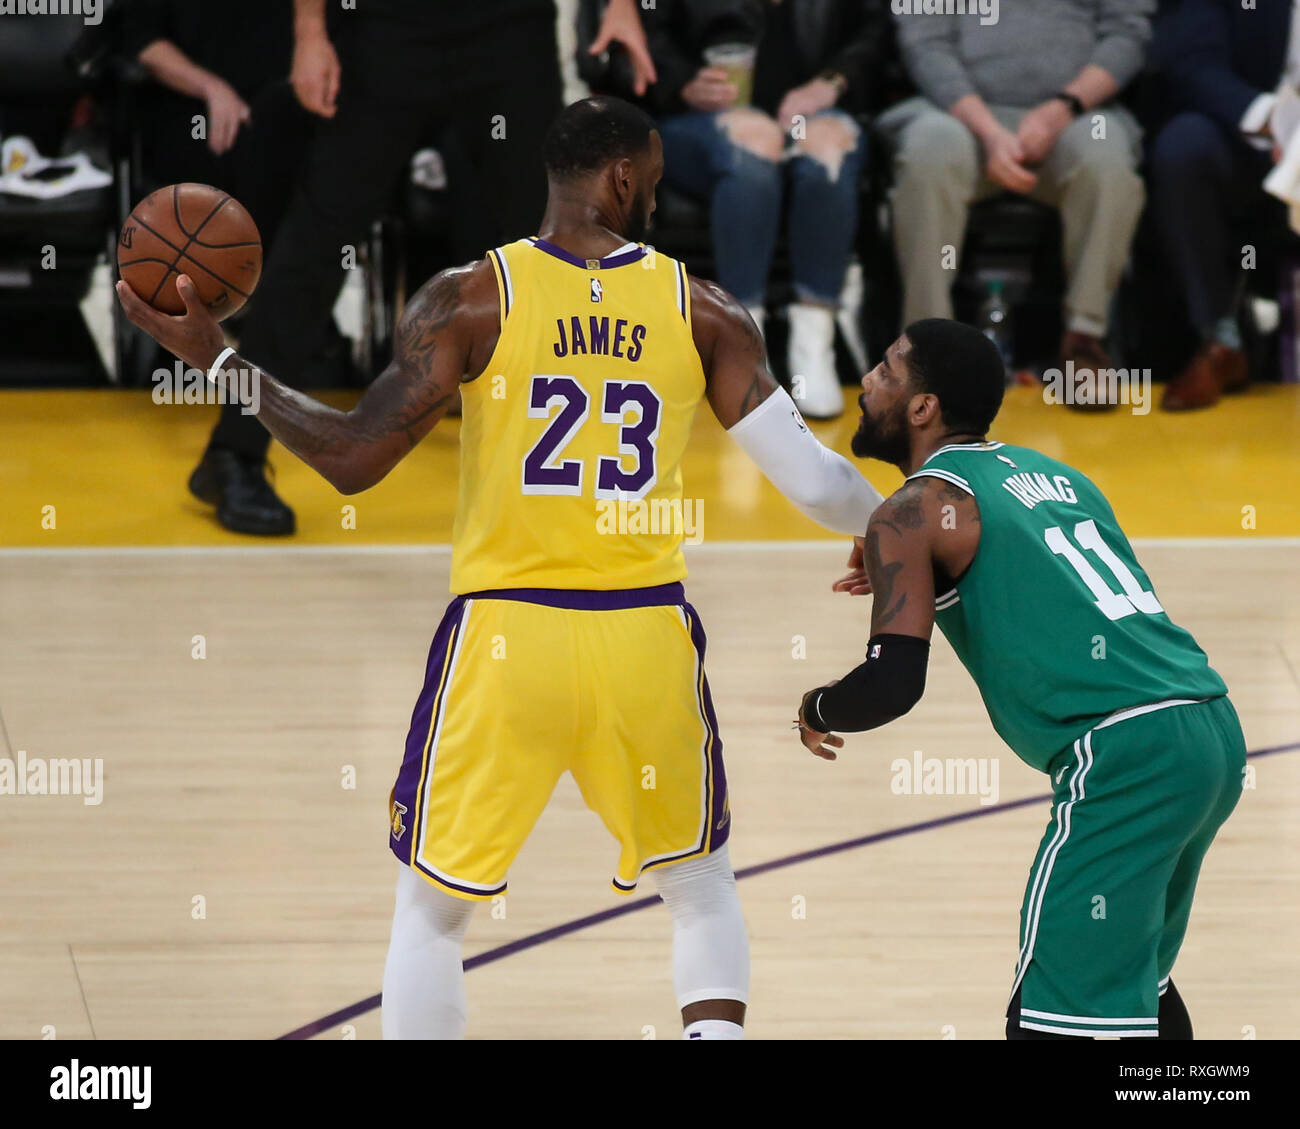 Los Angeles Lakers forward LeBron James #23 being guarded by Boston Celtics guard Kyrie Irving #11 during the Boston Celtics vs Los Angeles Lakers game at Staples Center in Los Angeles, CA on March 09, 2019. (Photo by Jevone Moore) Stock Photo